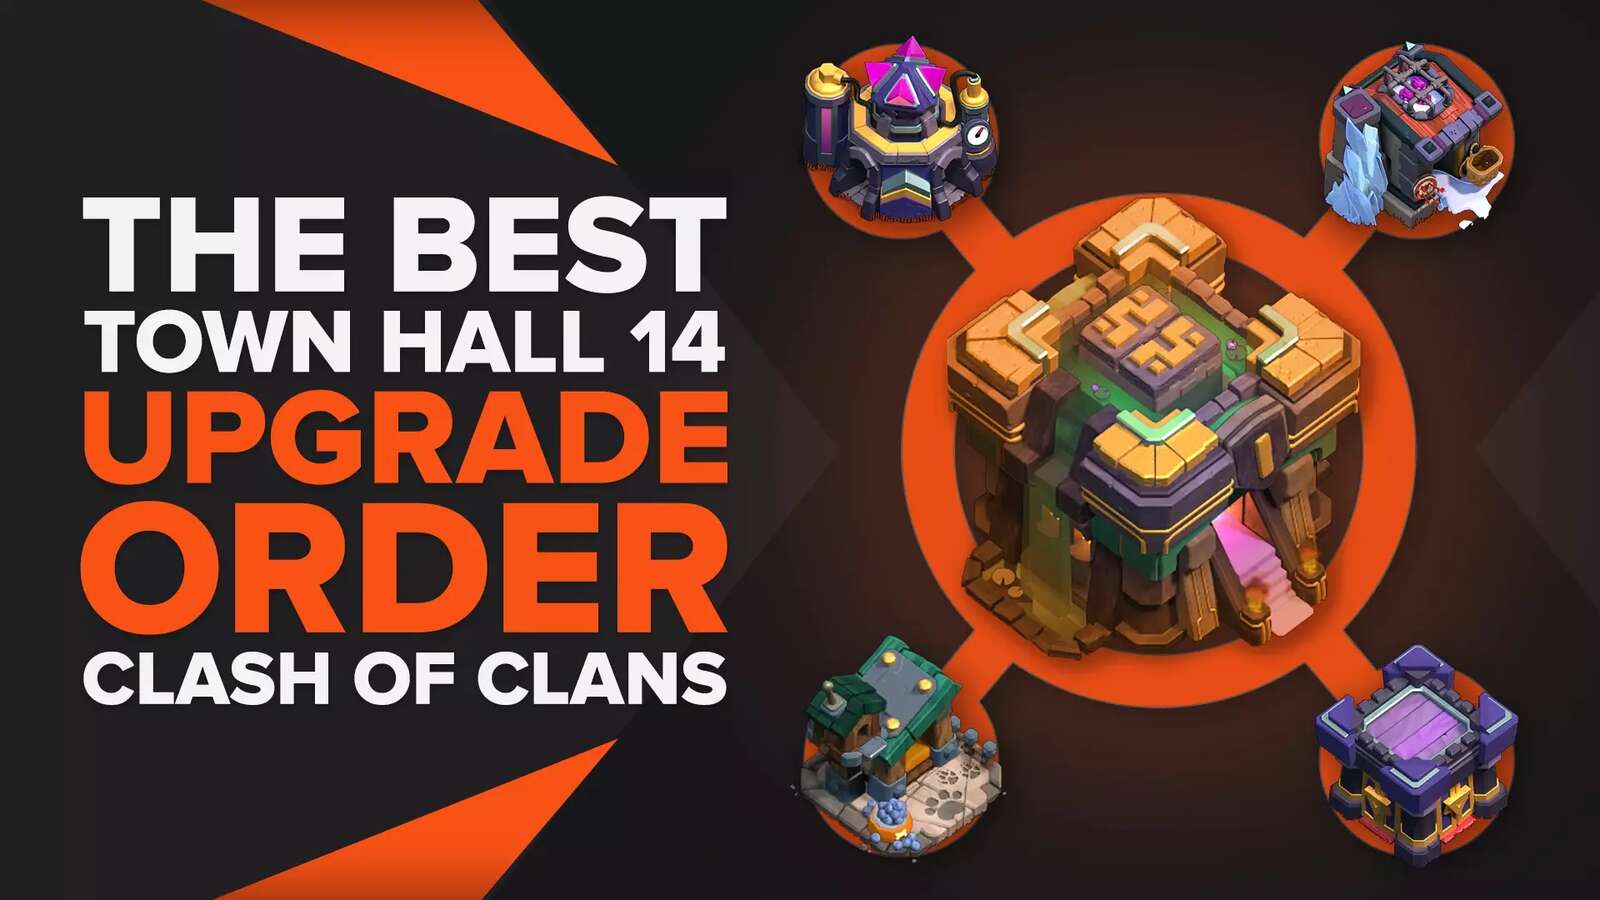 See The Best Town Hall 14 Upgrade Order In Clash Of Clans!